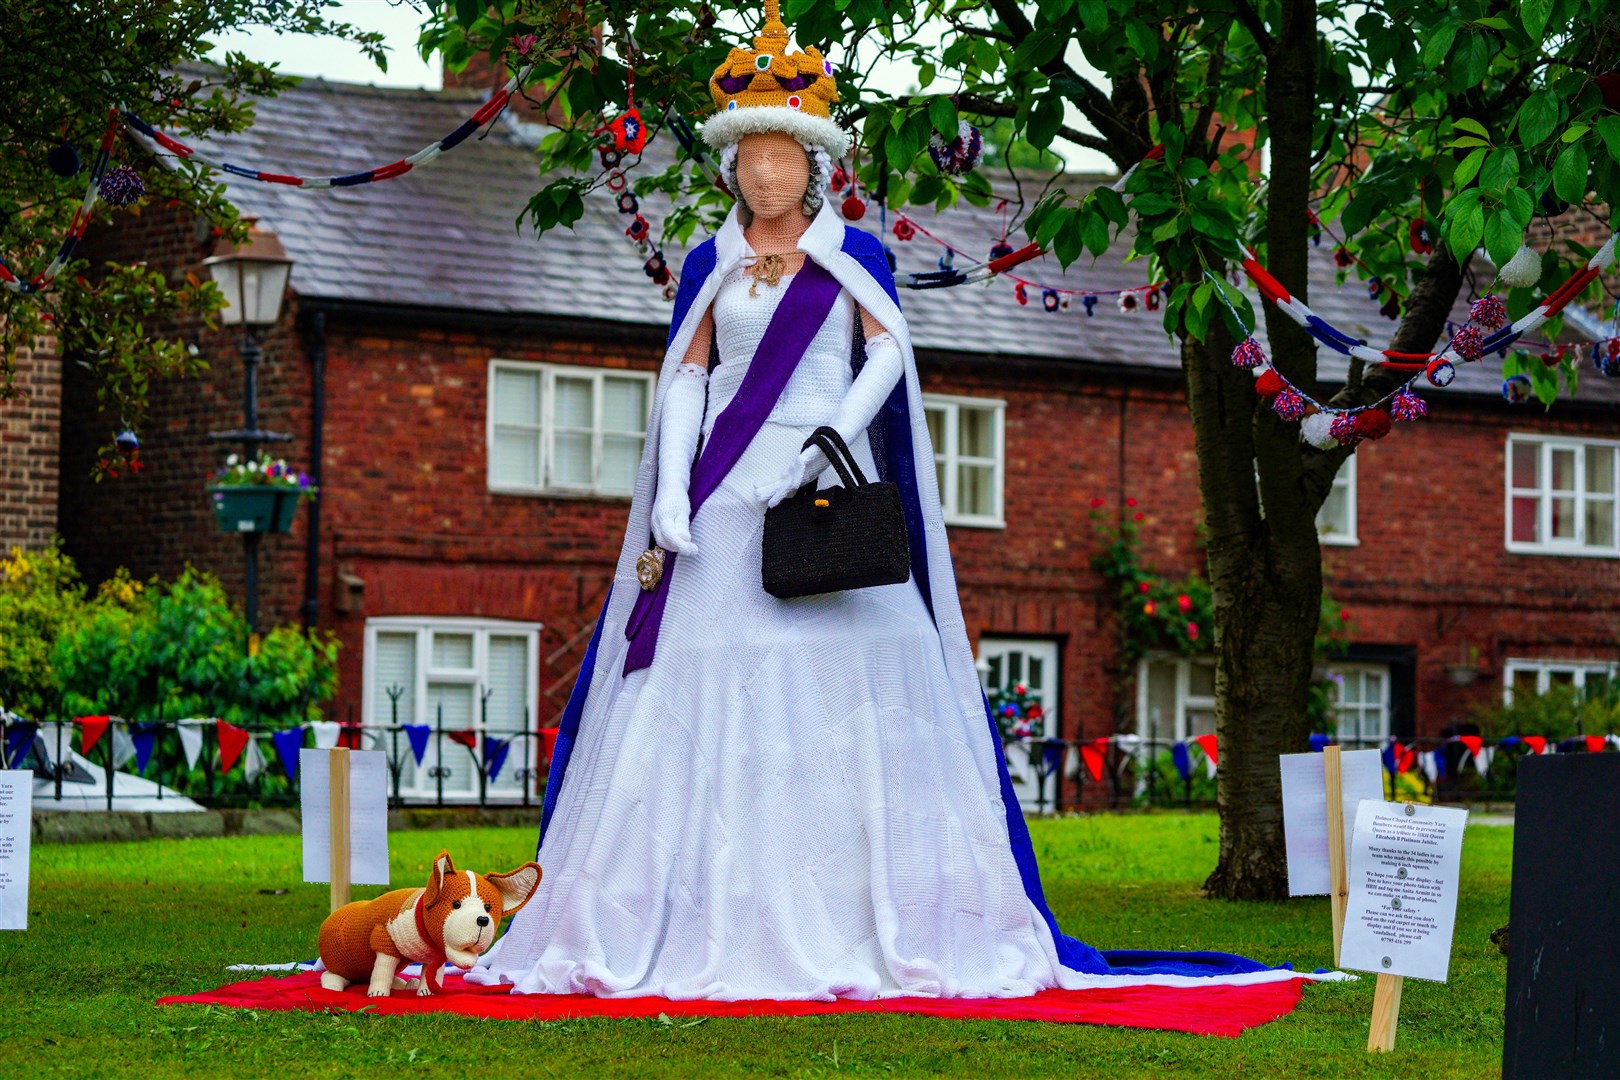 A life size knitted Queen and corgi in the village of Holmes Chapel in Cheshire, ahead of the Platinum Jubilee celebrations (Peter Byrne/PA)